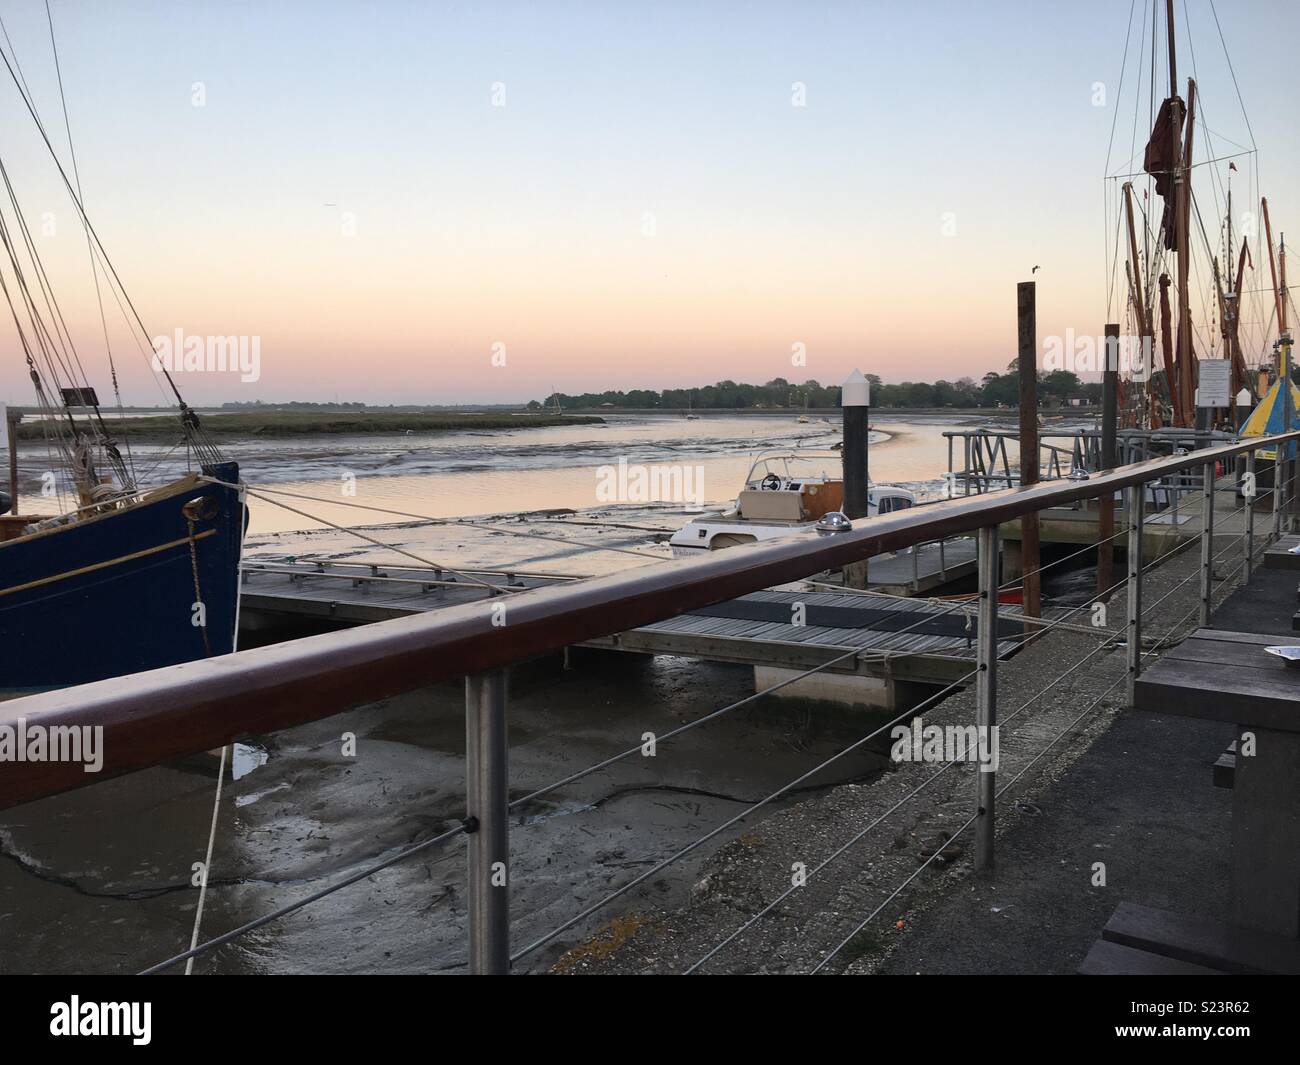 Sunset on the river Blackwater in Maldon, Essex Stock Photo